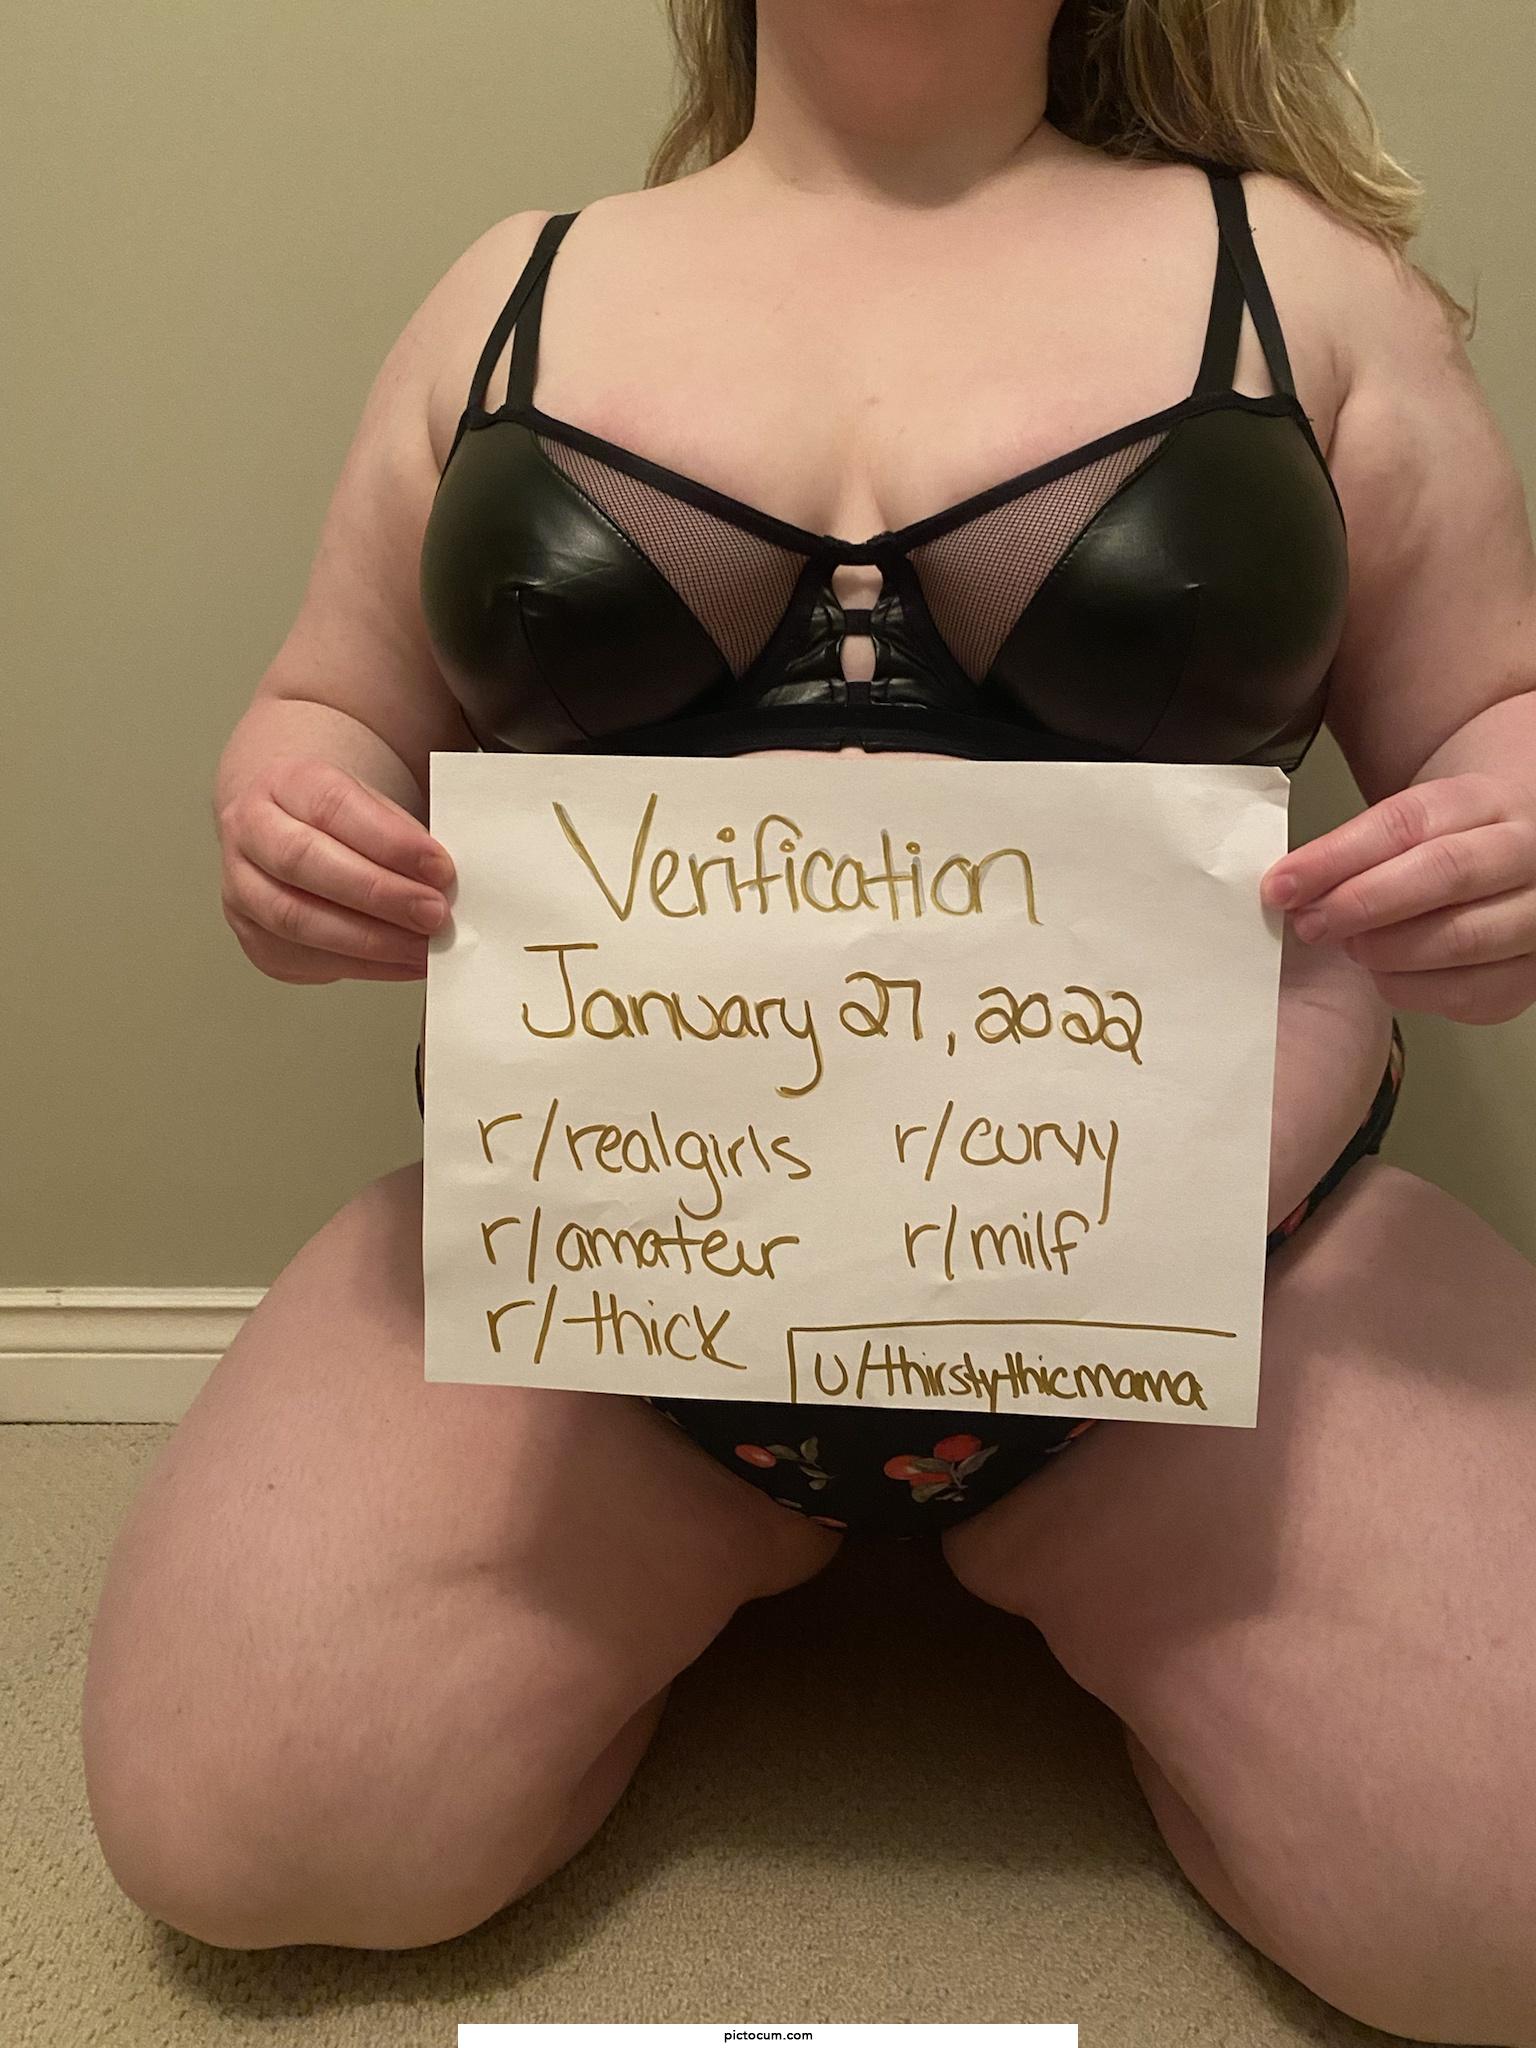 Looking to be verified please